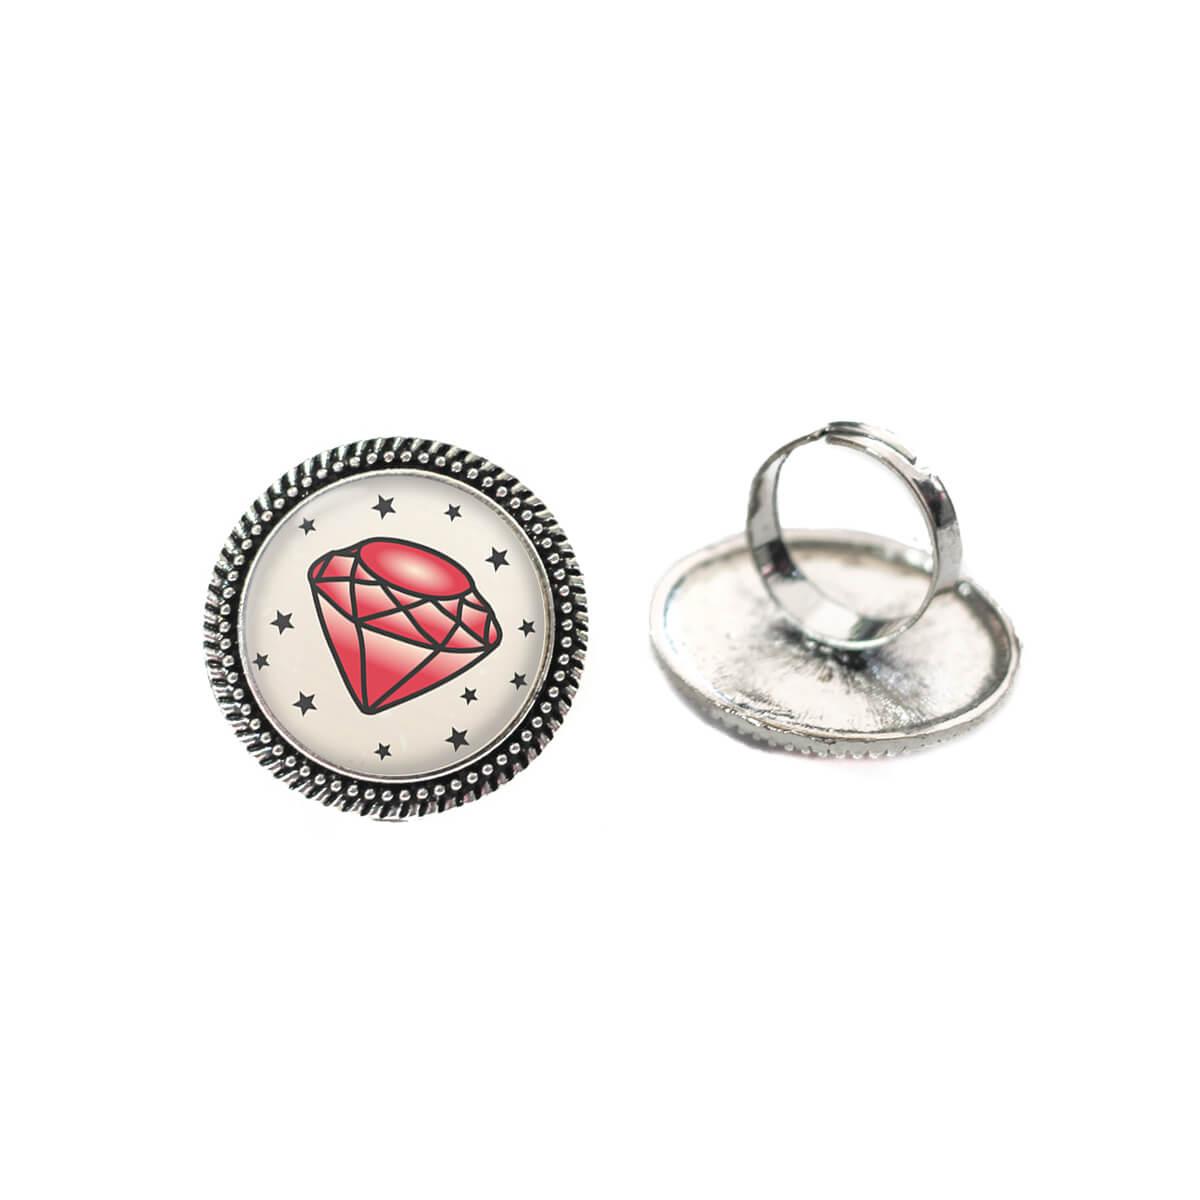 Double Red Diamond Logo - Traditonal Tattoo Red Diamond Glass 25mm Cabochon Silver Double Rope